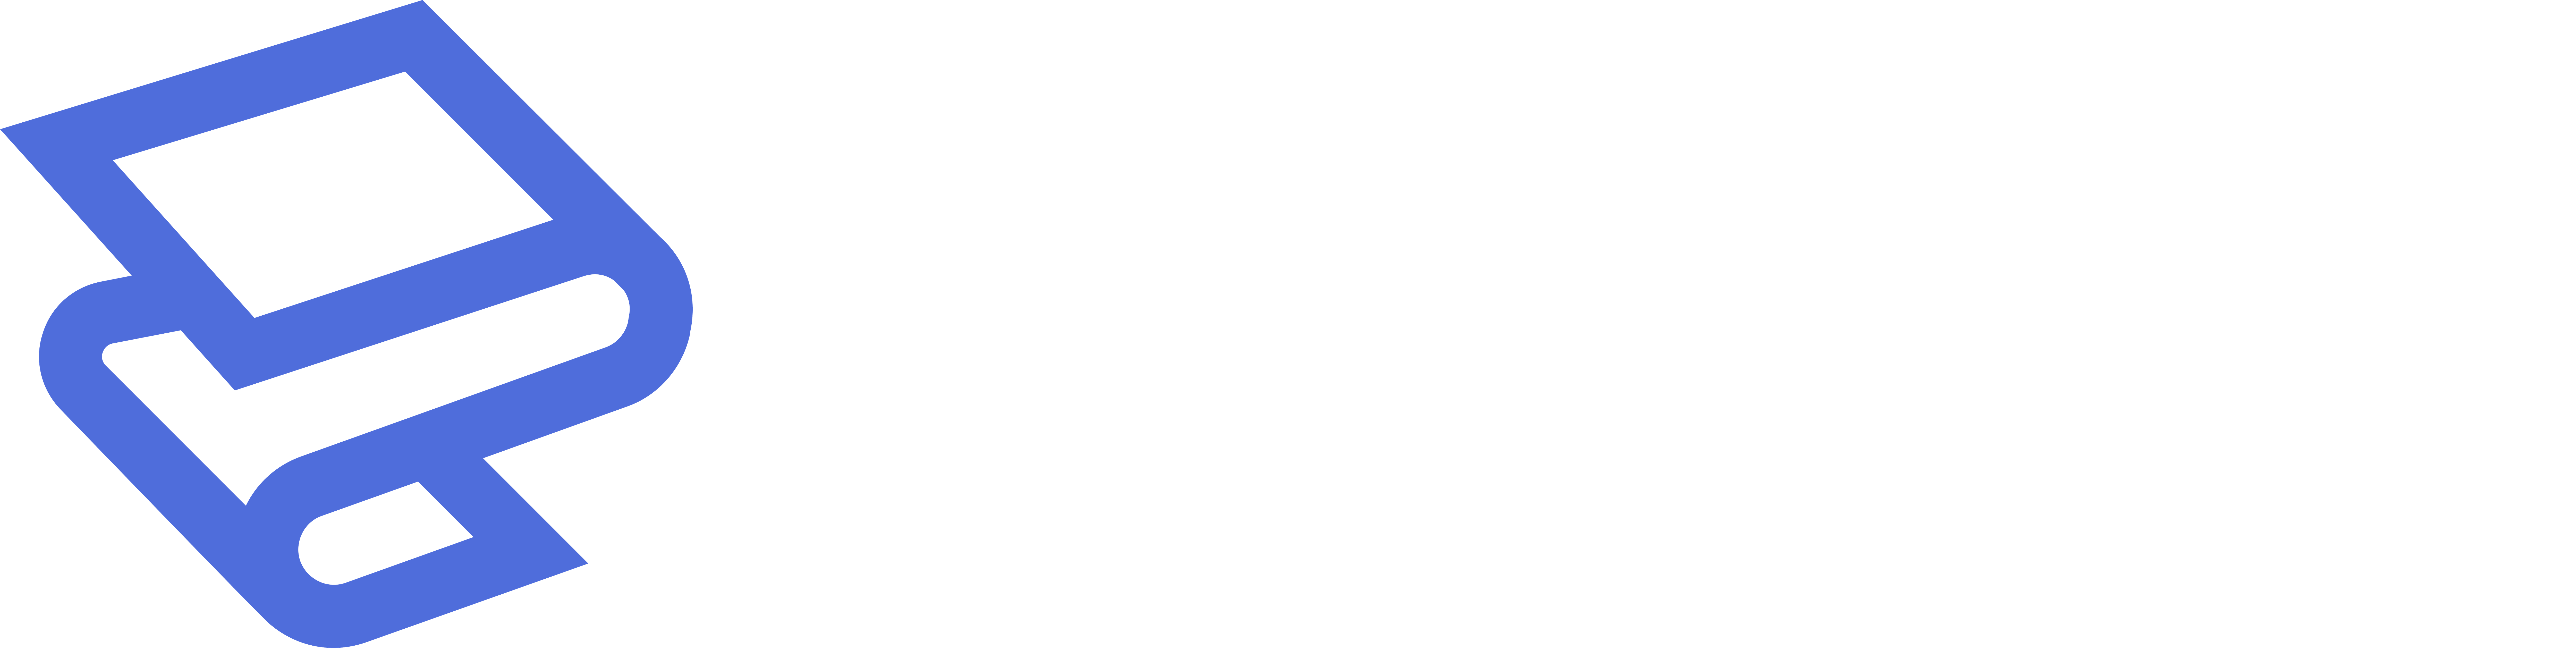 Zeplyn.ai